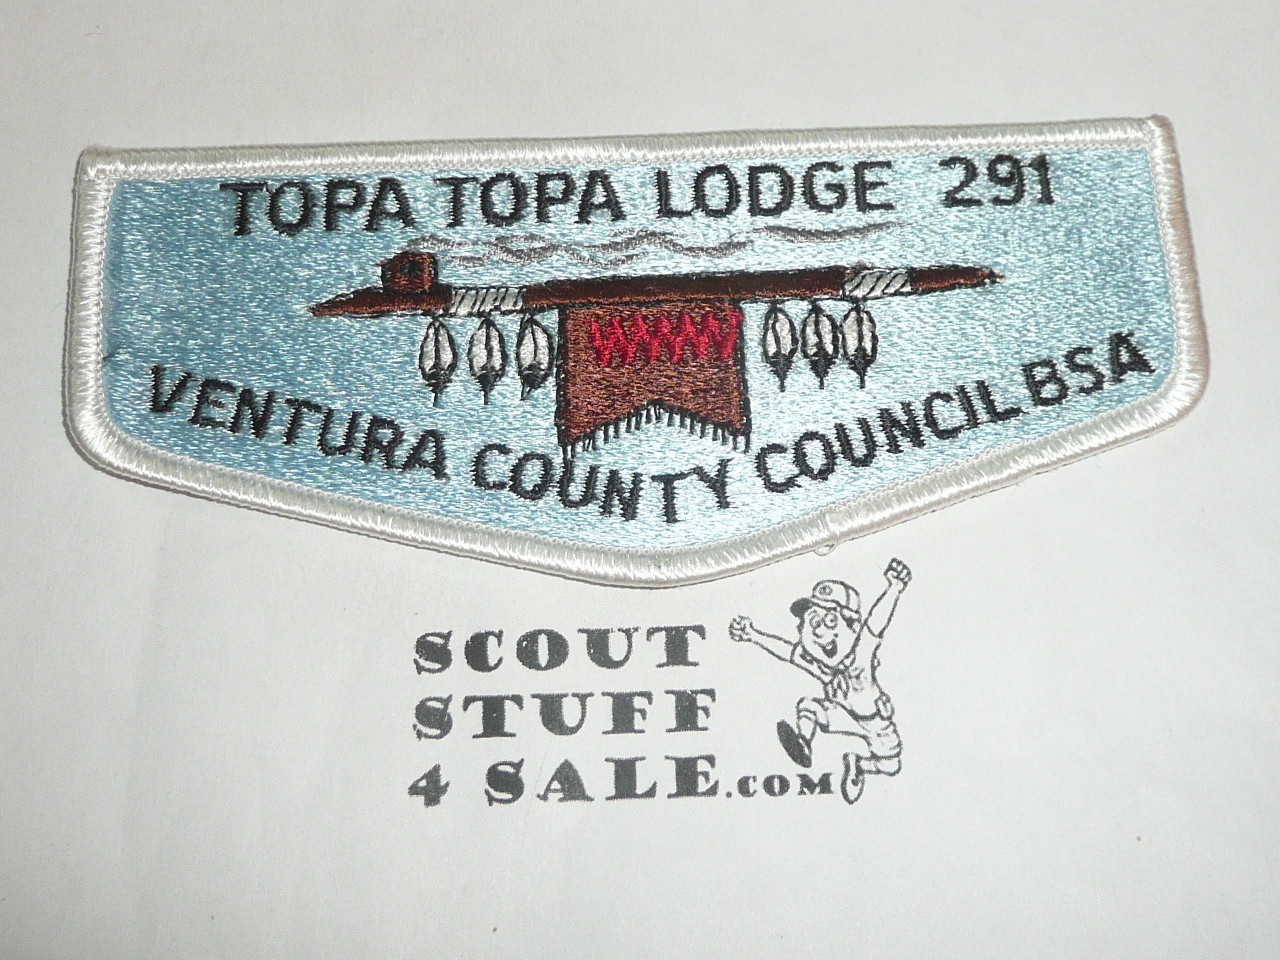 Order of the Arrow Lodge #291 Topa Topa s19 1986 NOAC Flap Patch